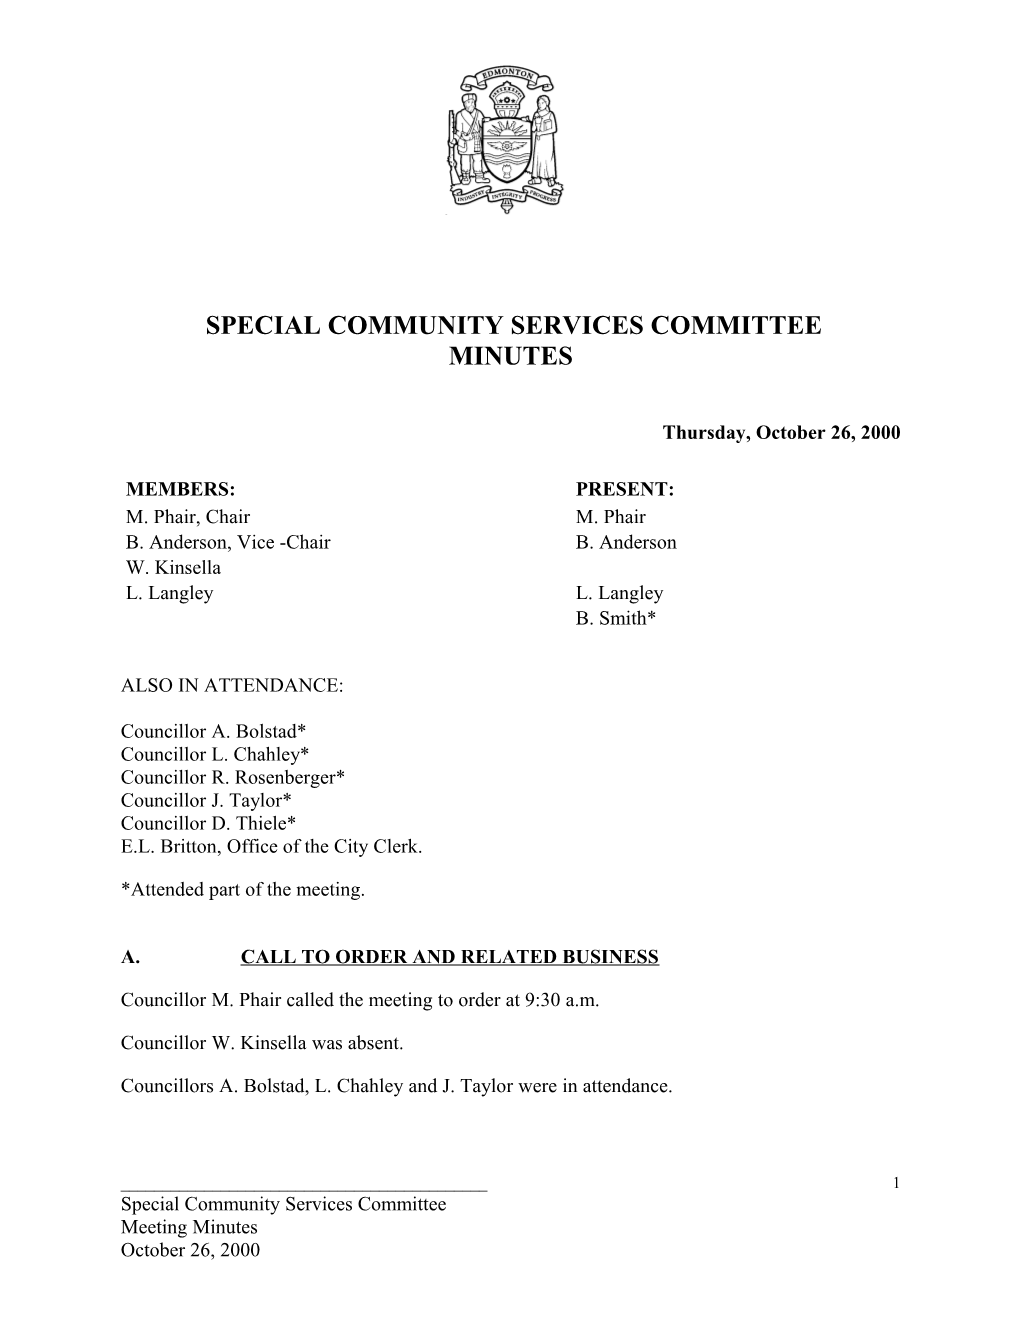 Minutes for Community Services Committee October 26, 2000 Meeting